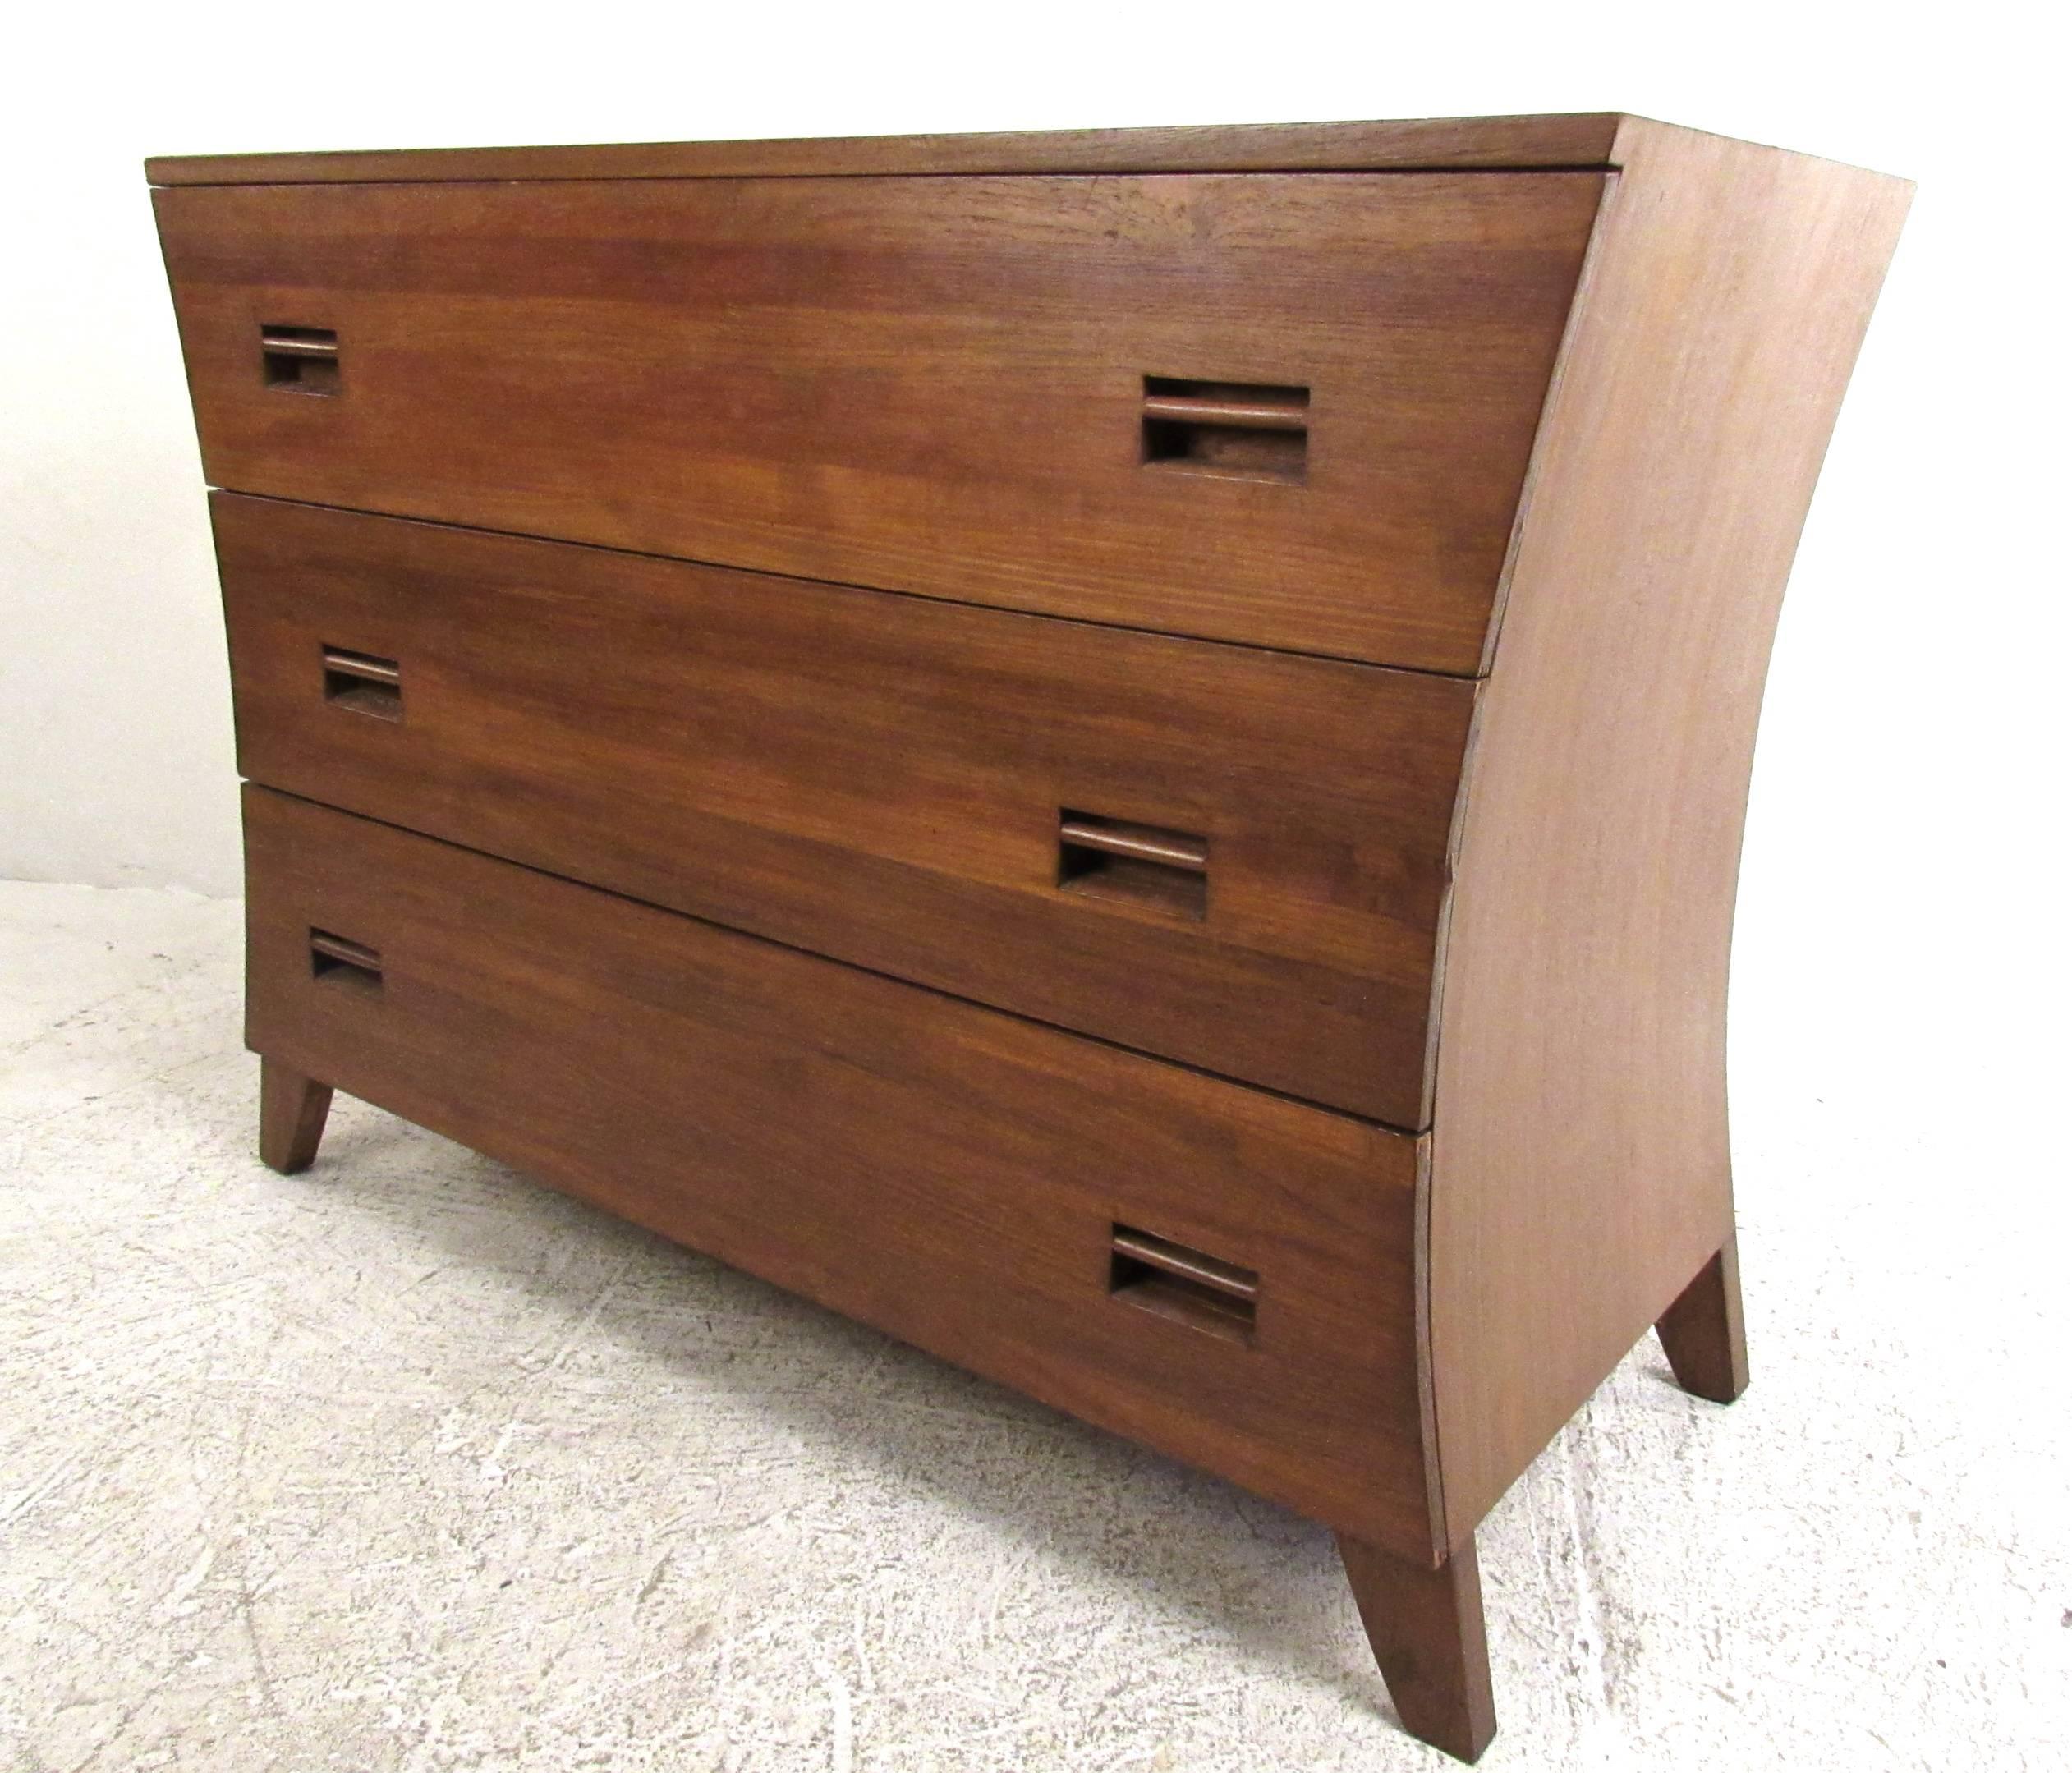 This Mid-Century pair of three drawer dressers make a wonderful complimentary set of storage pieces for any setting. Sculpted chests feature unique concave sides with recessed pulls in a rich teak finish. Vintage dresser set makes a great addition